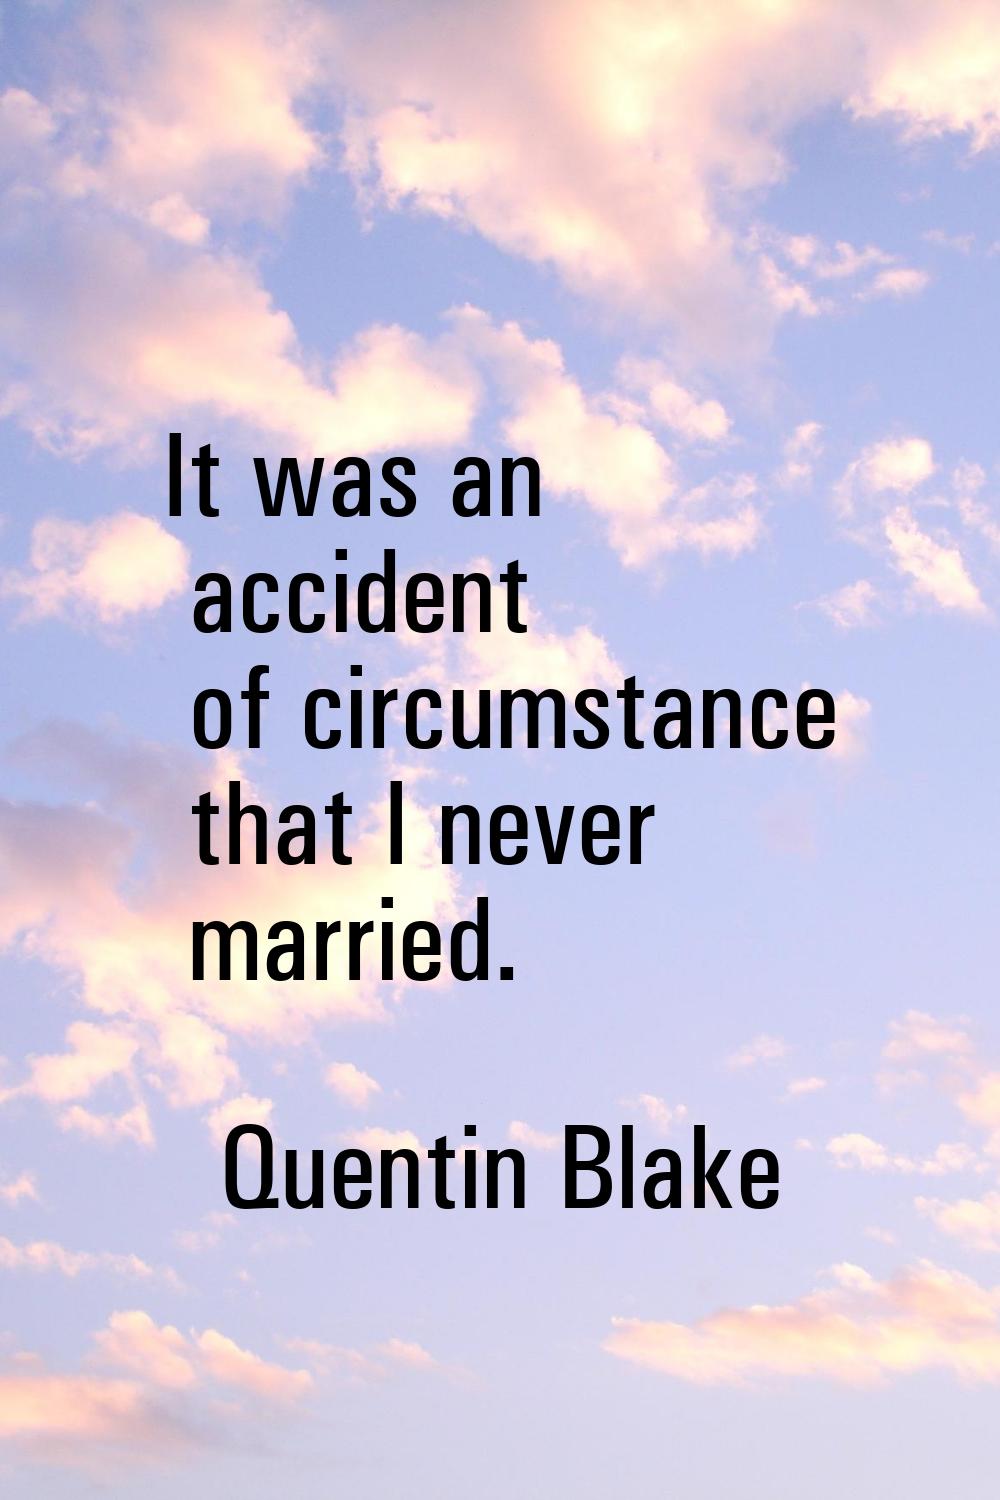 It was an accident of circumstance that I never married.